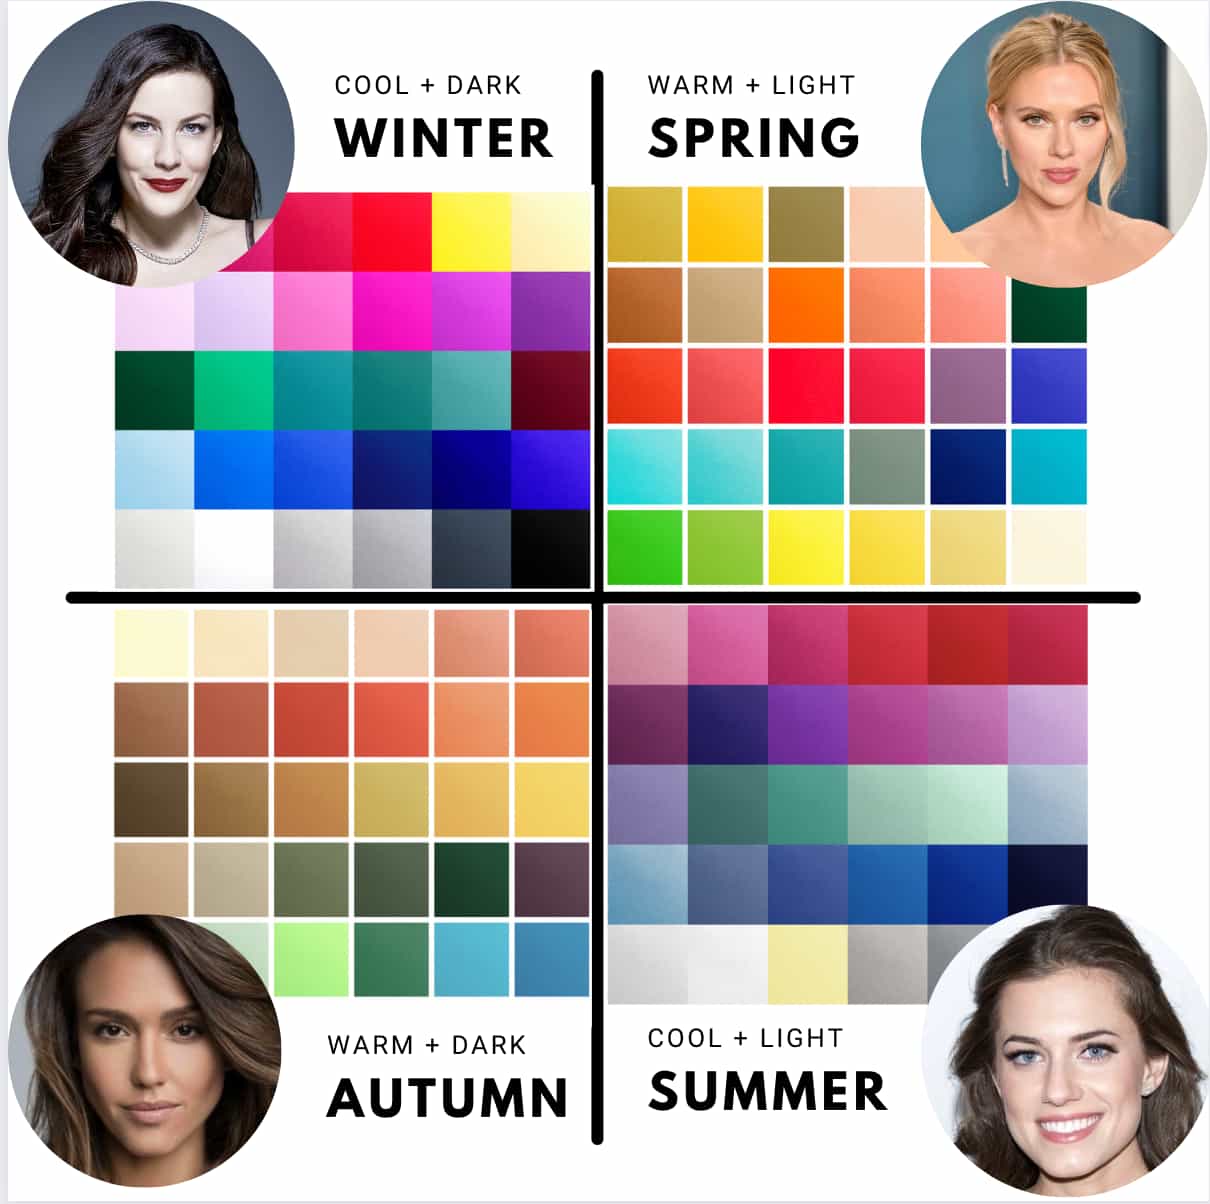 4 quadrants of seasonal color familys with palettes and celebrity example